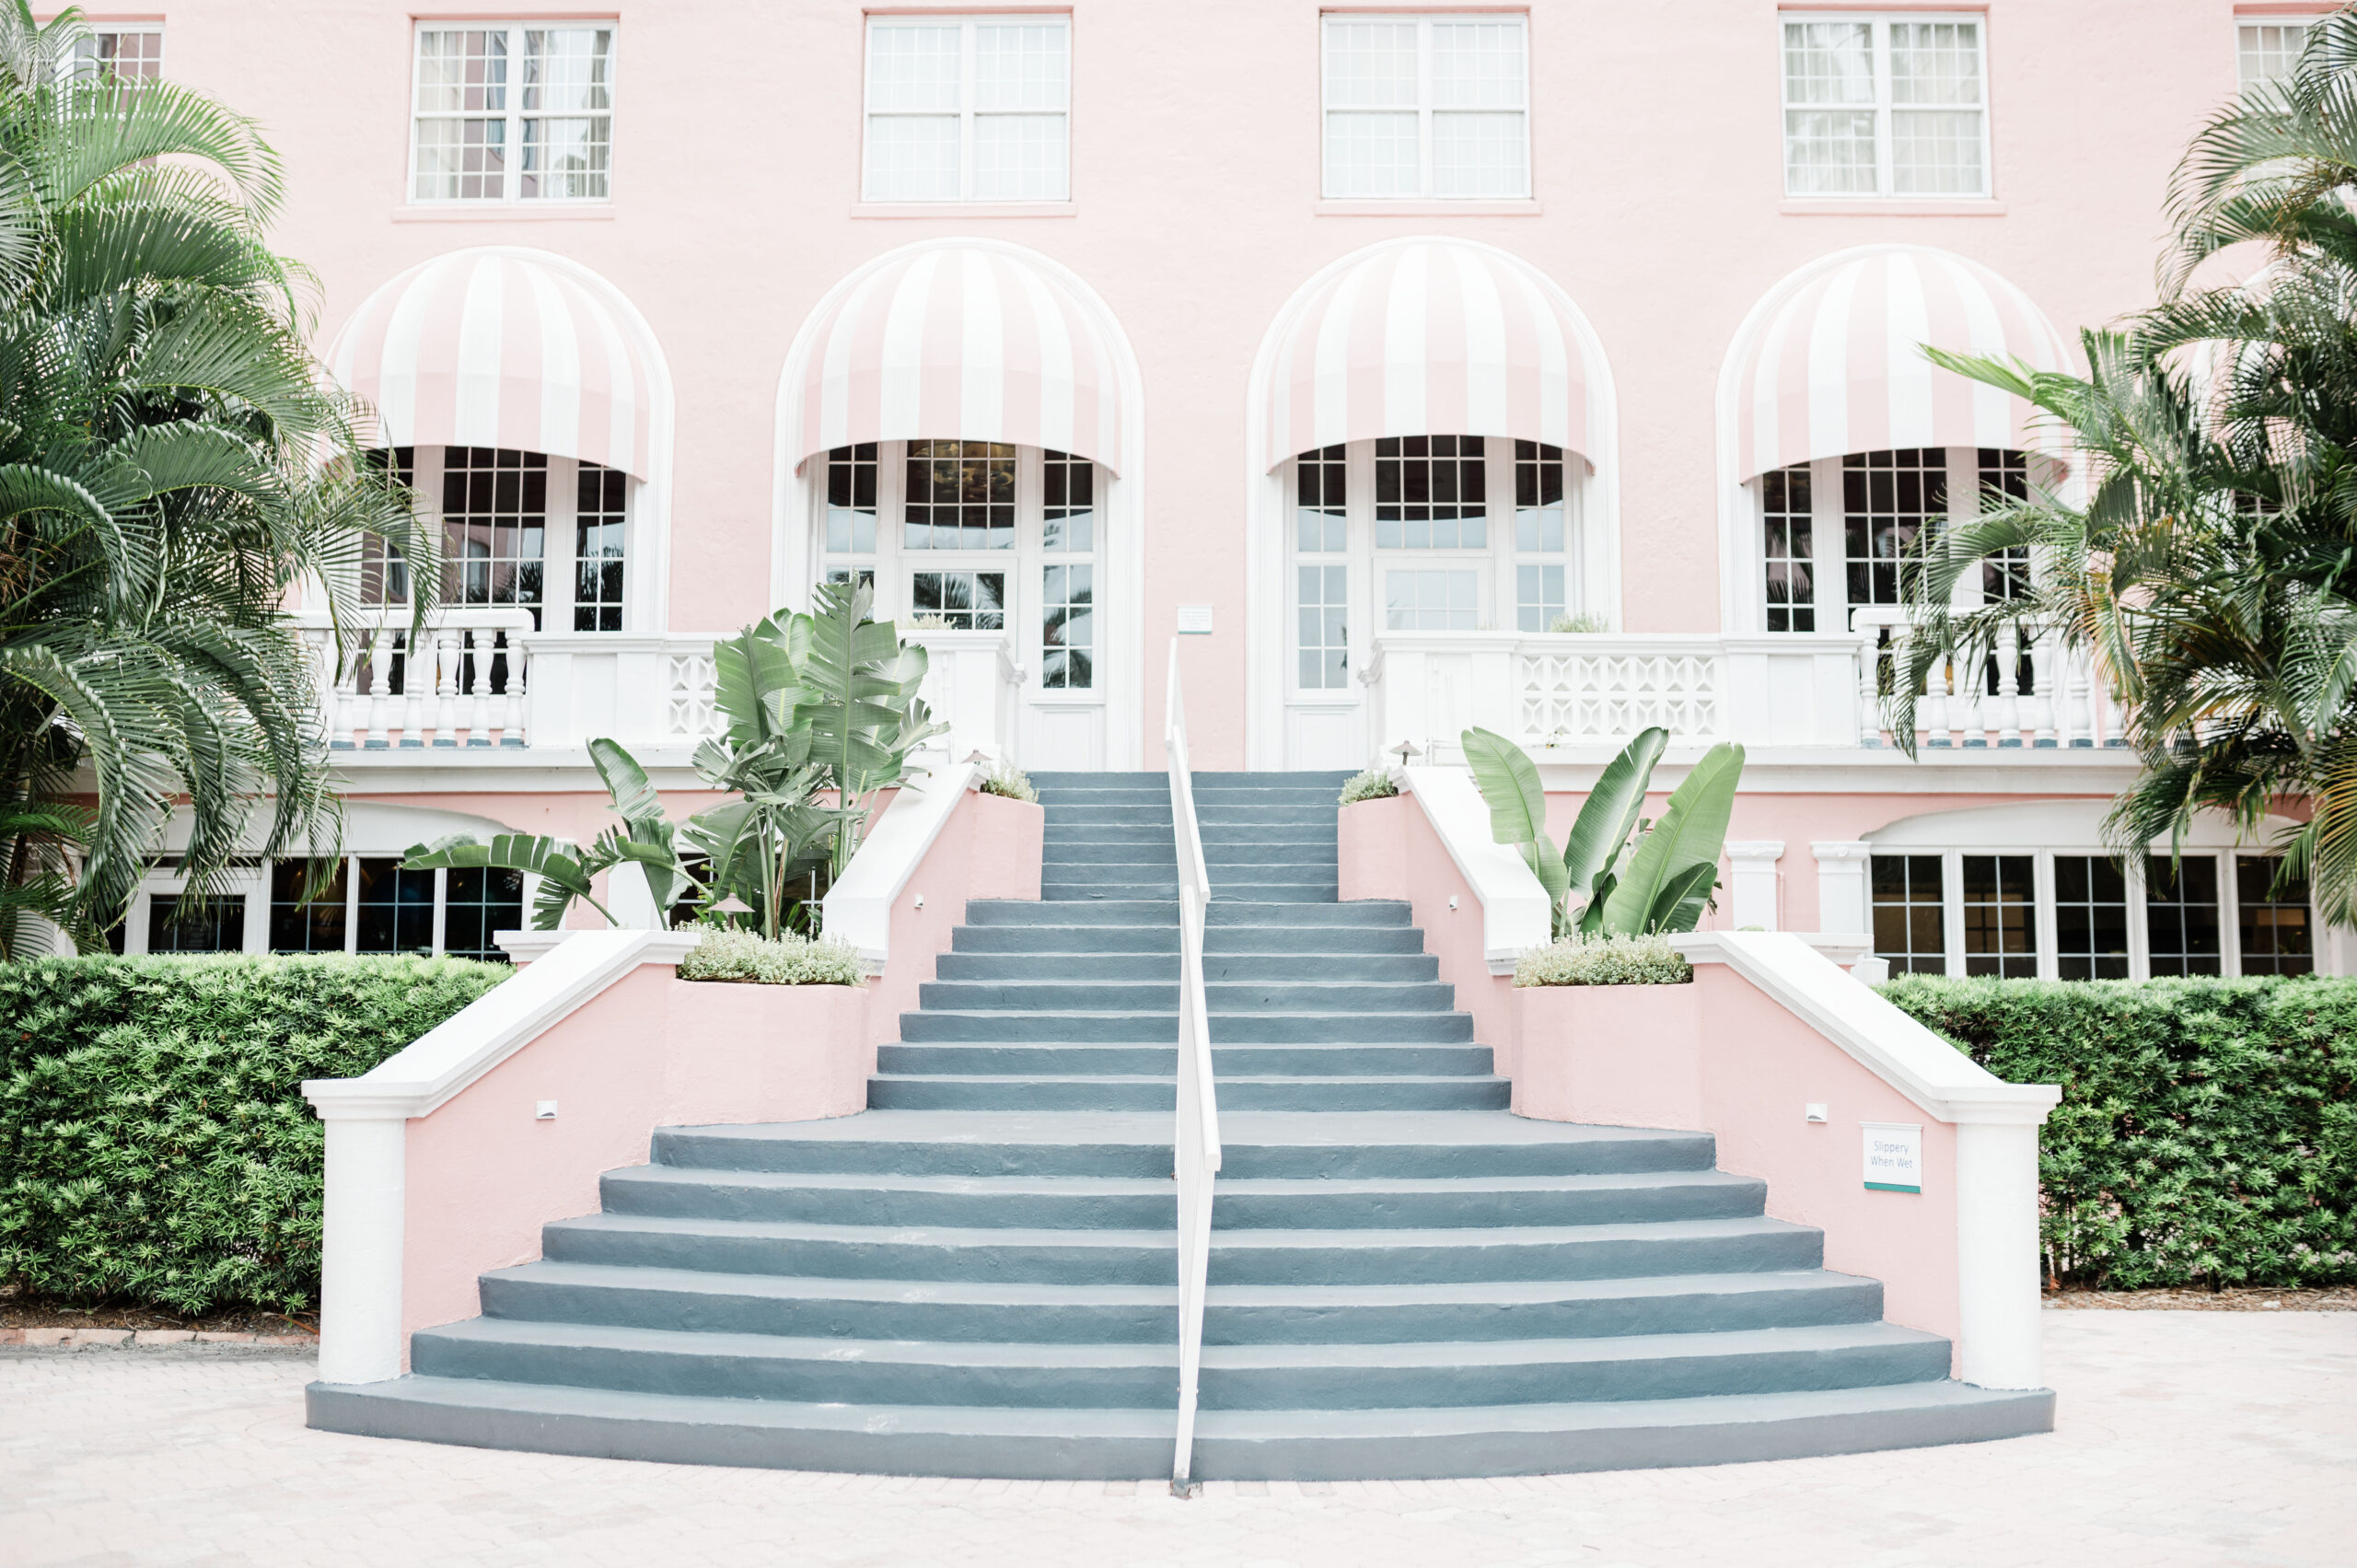 Staircase outside back patio of The Don CeSar in Saint Pete Florida